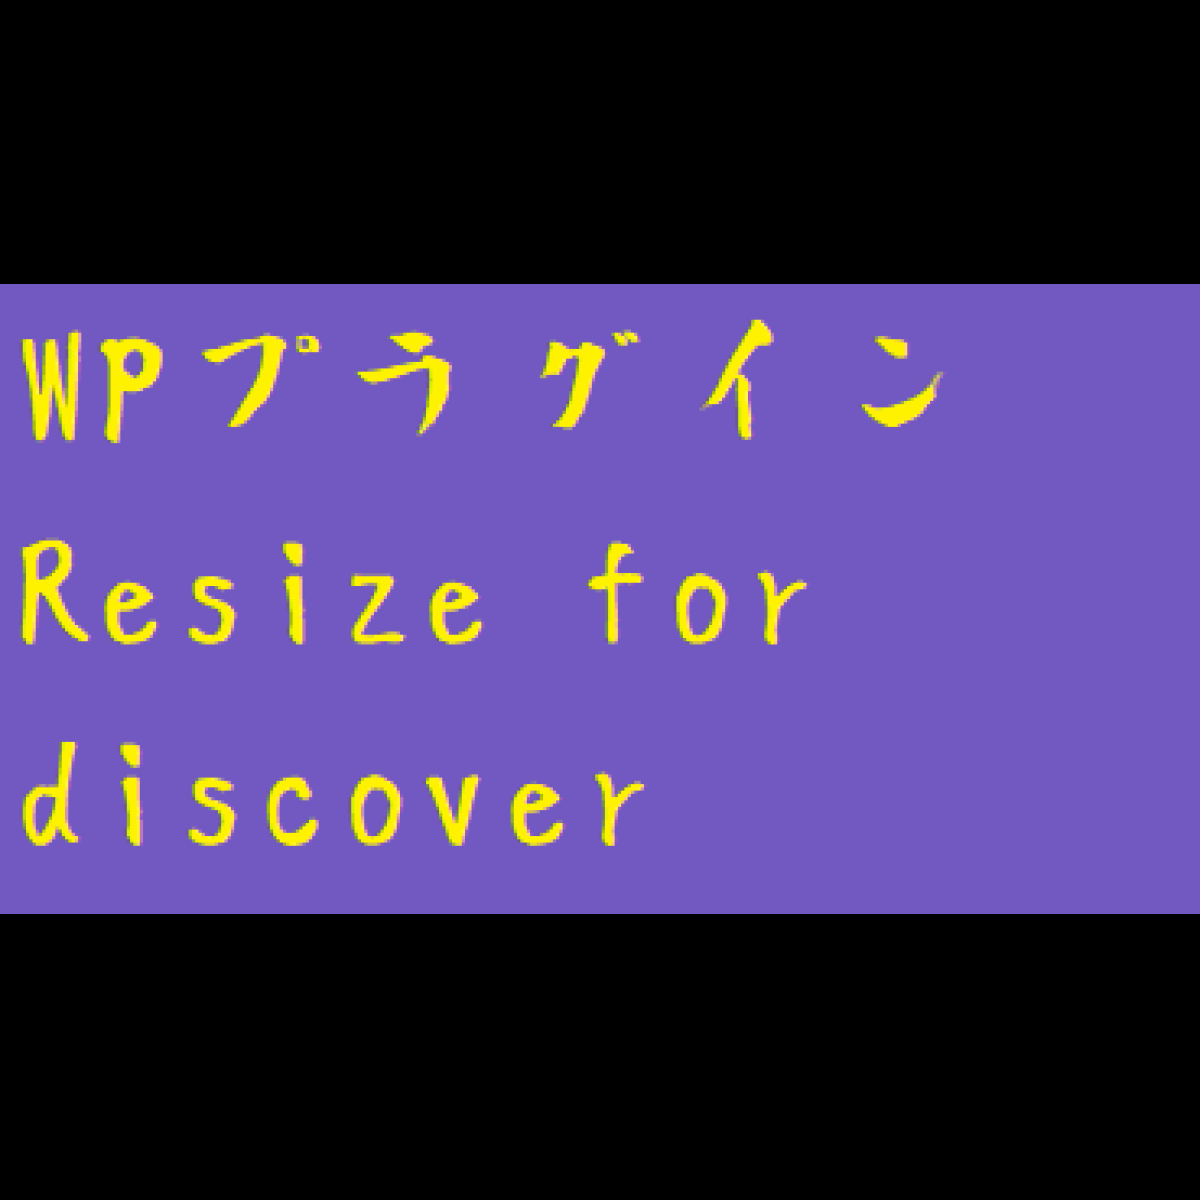 Resize-for-discoverアスペクト比1：1幅1200×1200